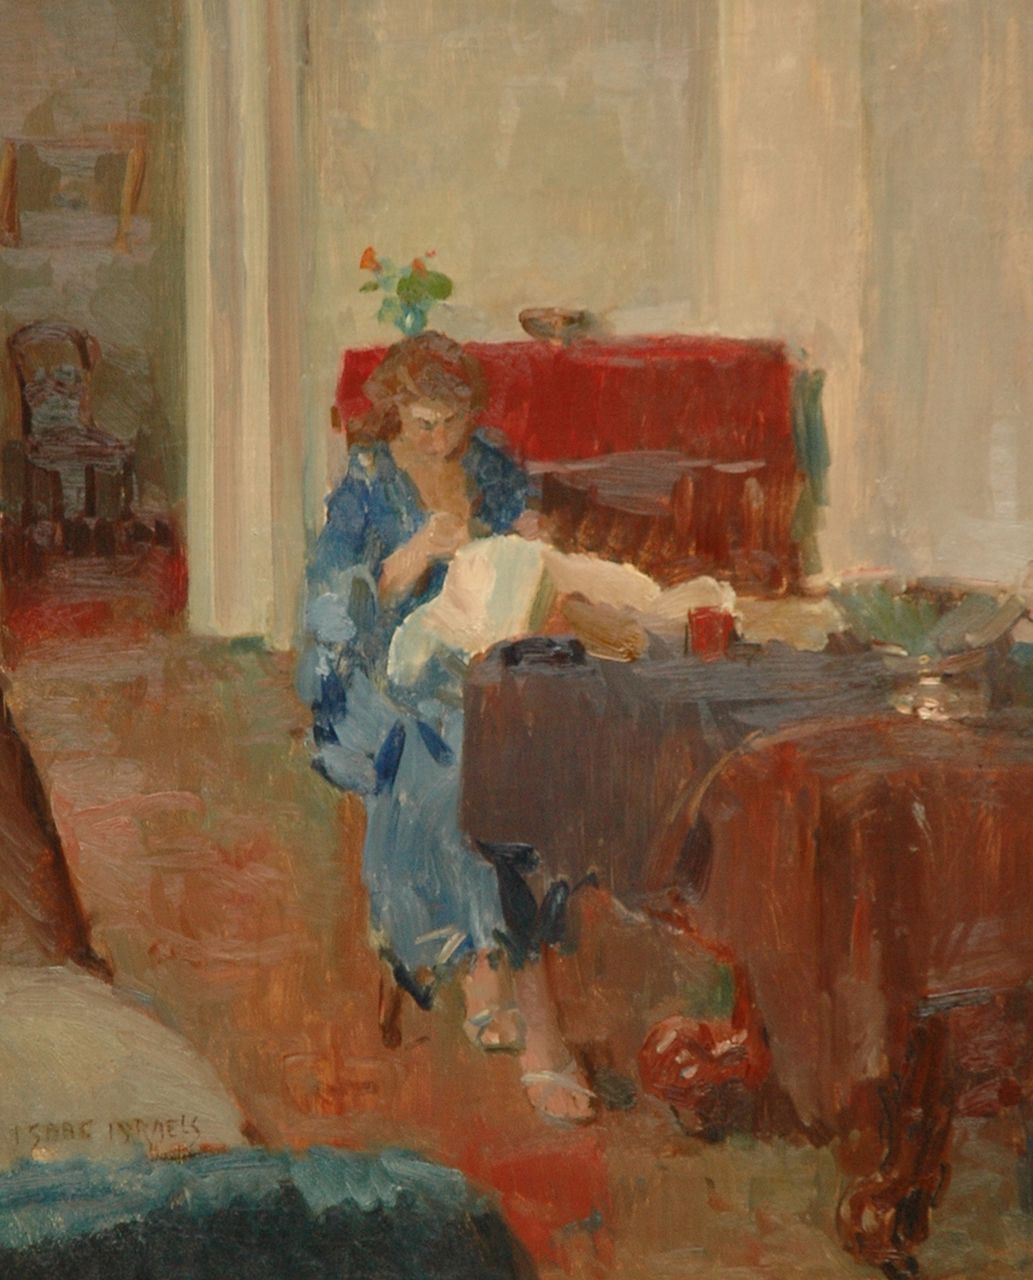 Israels I.L.  | 'Isaac' Lazarus Israels, Sophie in interior, oil on canvas 80.0 x 65.0 cm, signed l.l.